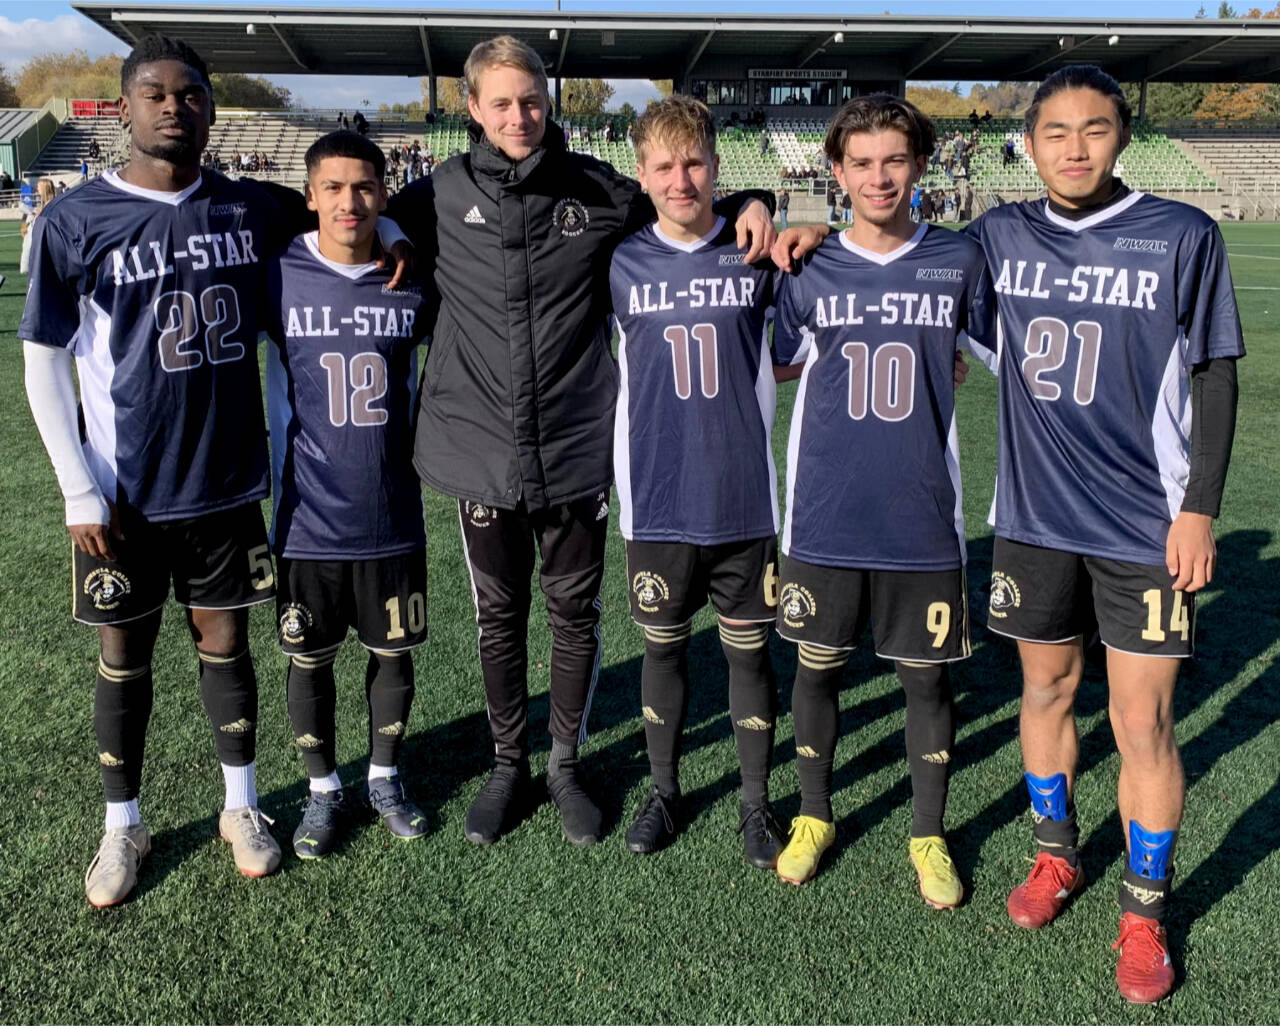 The Peninsula College North All Stars soccer players competed in the Northwest Athletic Conference all-star game held Sunday at the Starfire Soccer Complex. From left, Dylan Pauw, Fernando Tavares, coach Jake Hughes, Tim Deser, Pau Vivas Ayala and Shu Kato.